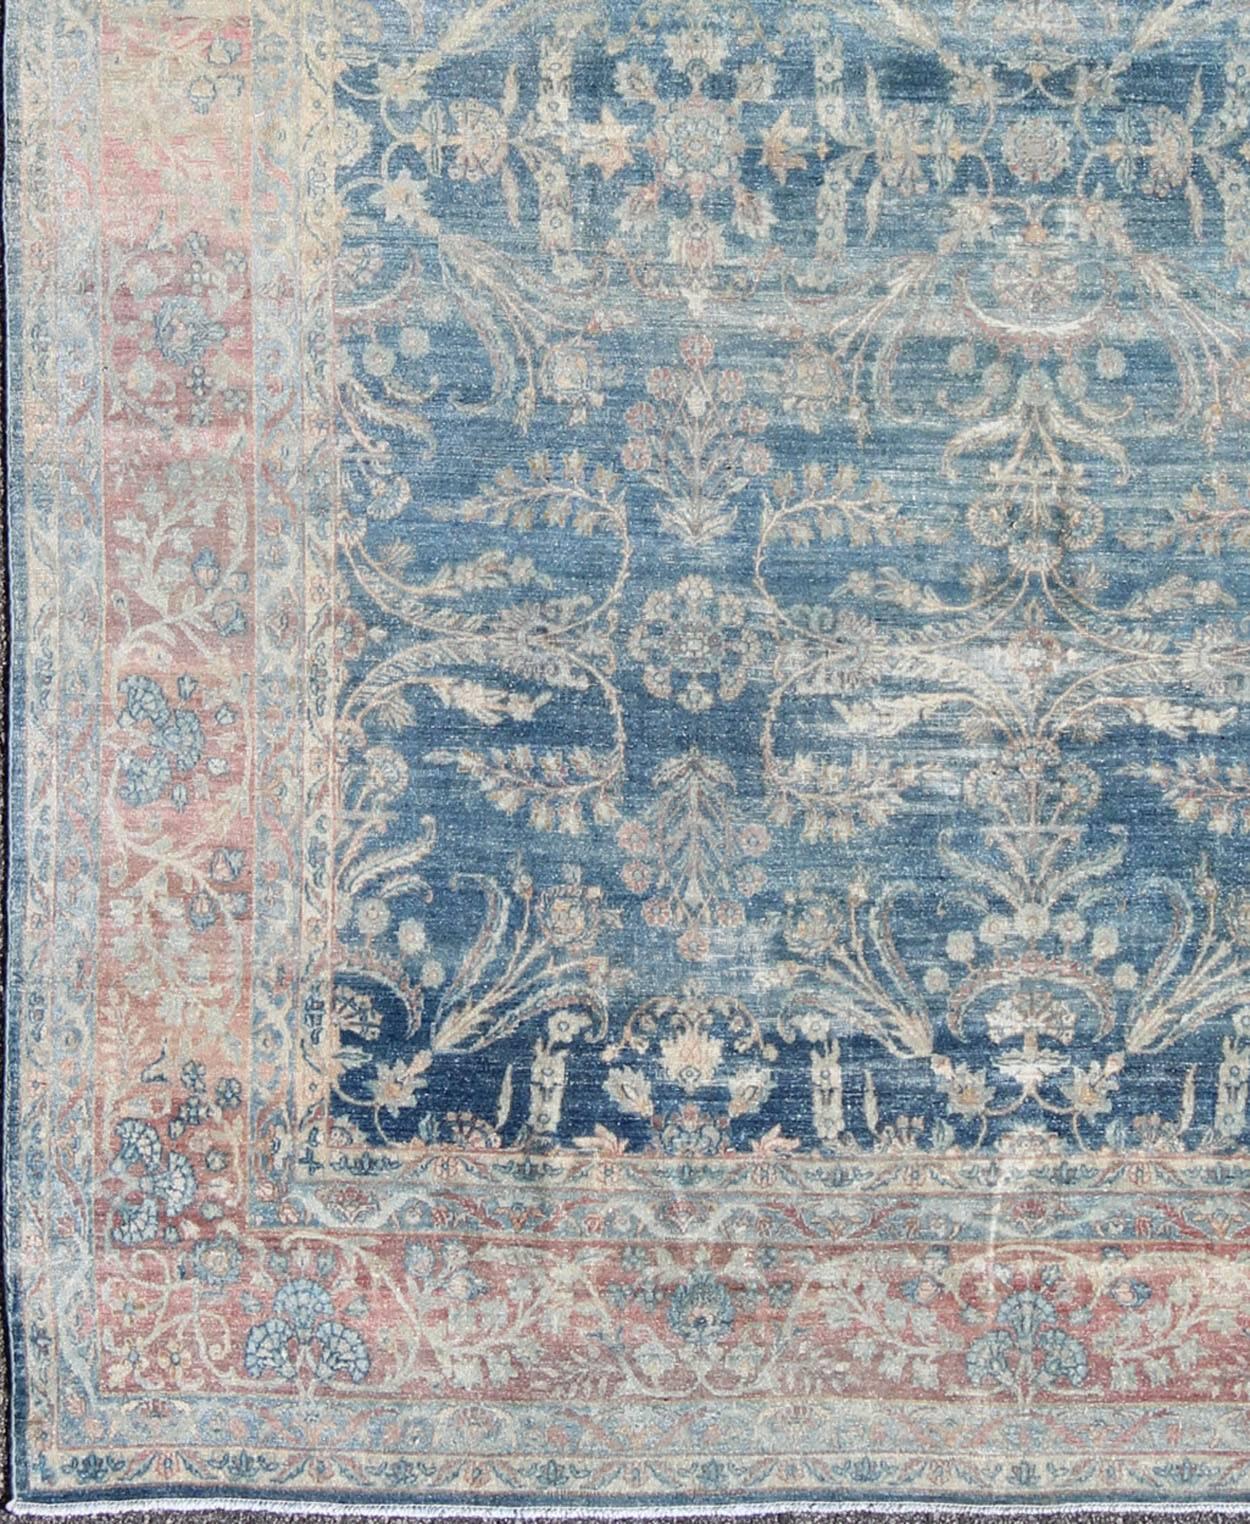 Antique Hand Knotted Persian Kerman rug with Paisley and floral motifs on blue field, Keivan Woven Arts / rug 16-1003, country of origin / type: Iran / Kerman, circa 1920

This antique Persian Kerman rug features a blue field, which hosts a